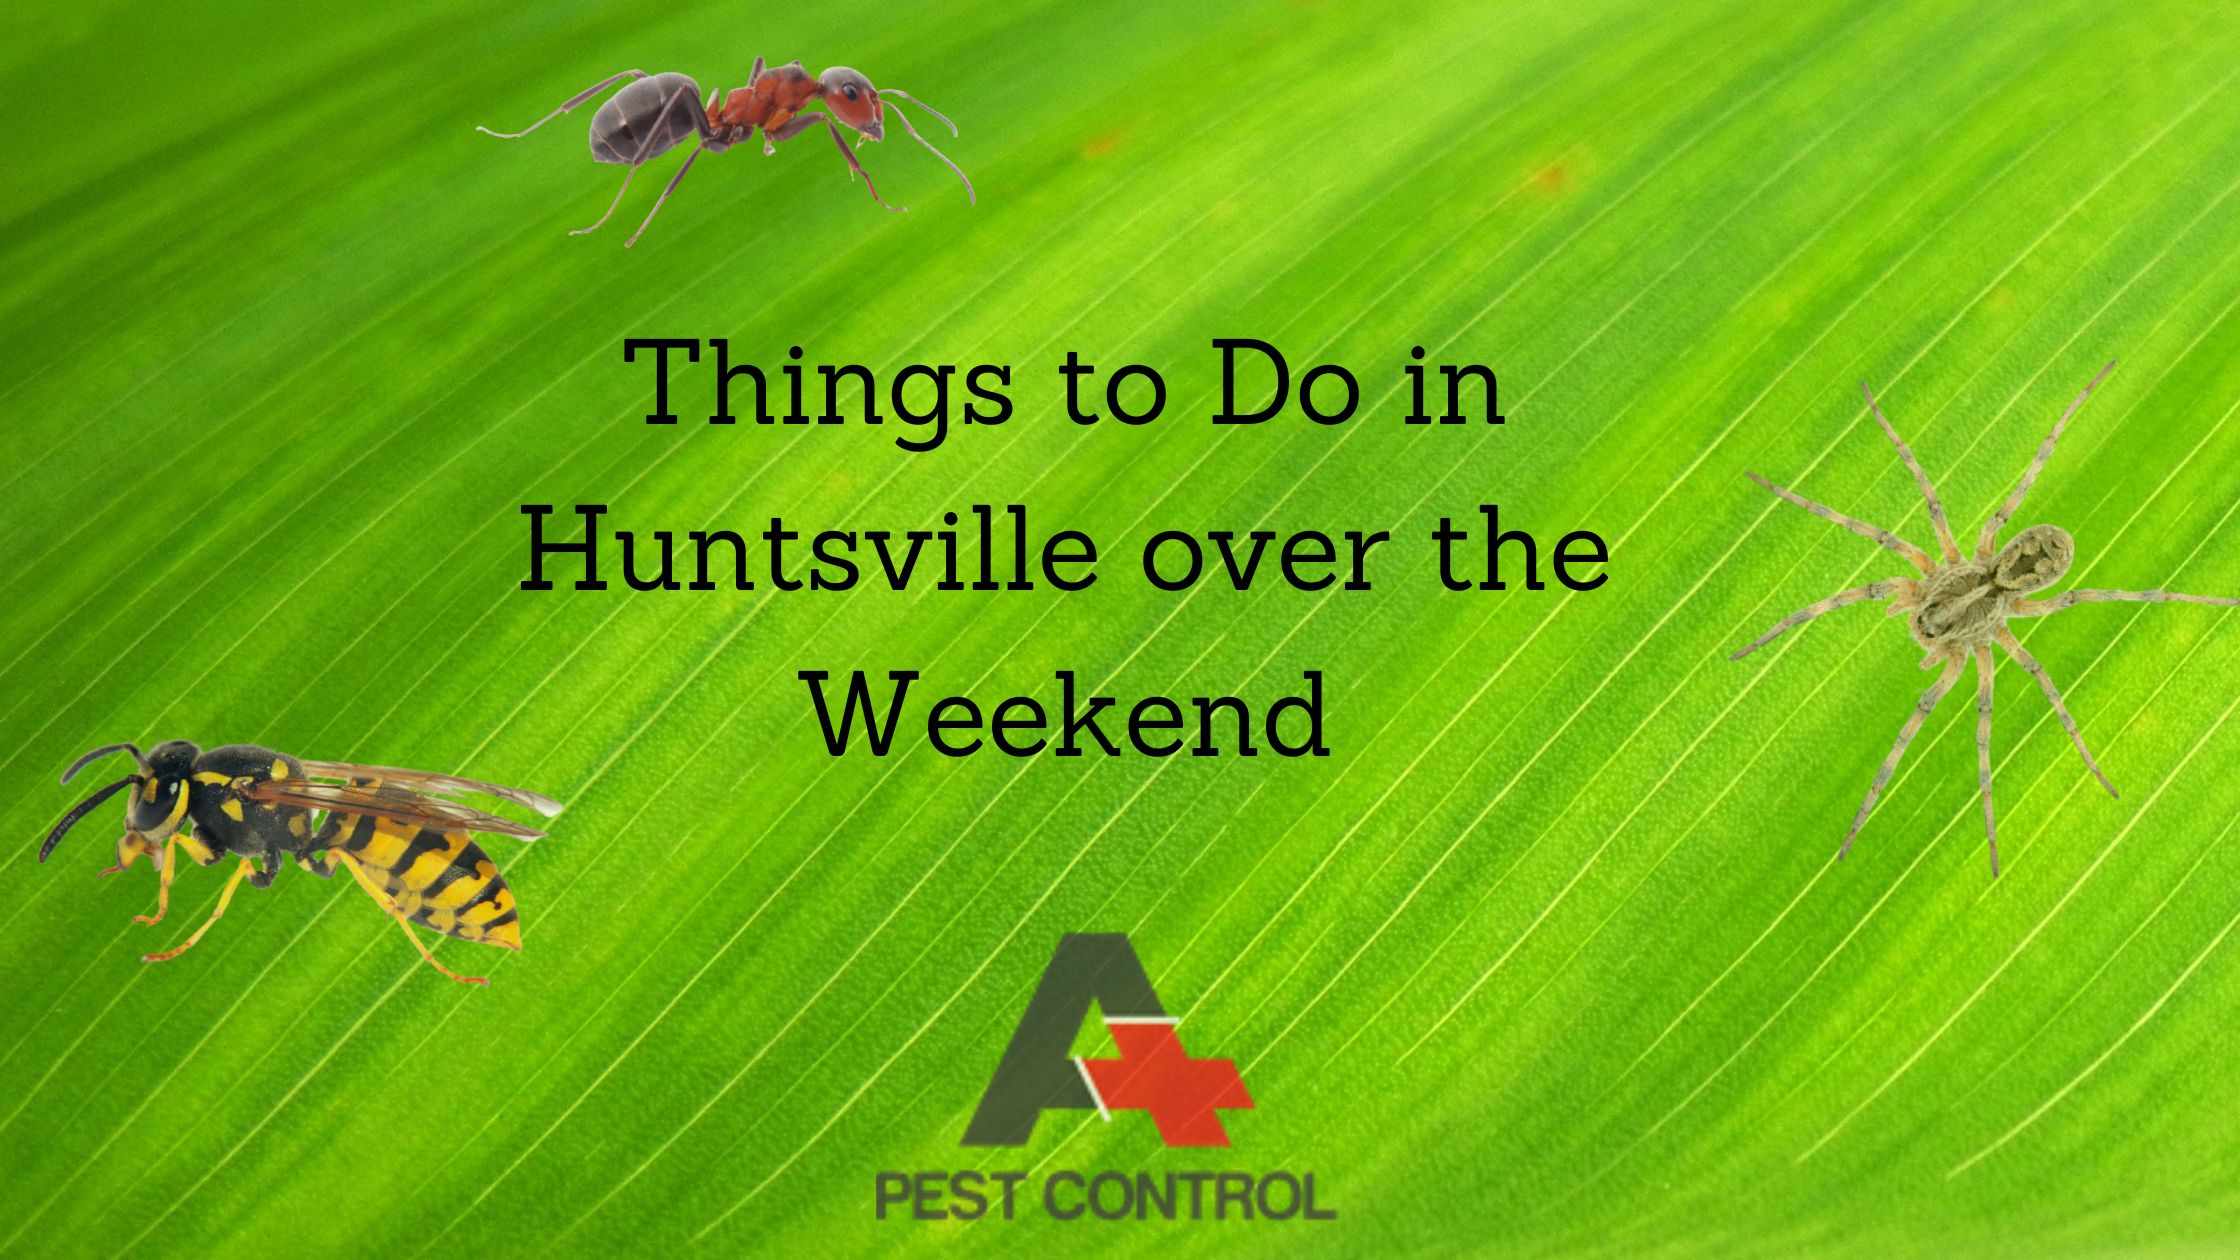 Things to Do in Huntsville over the Weekend